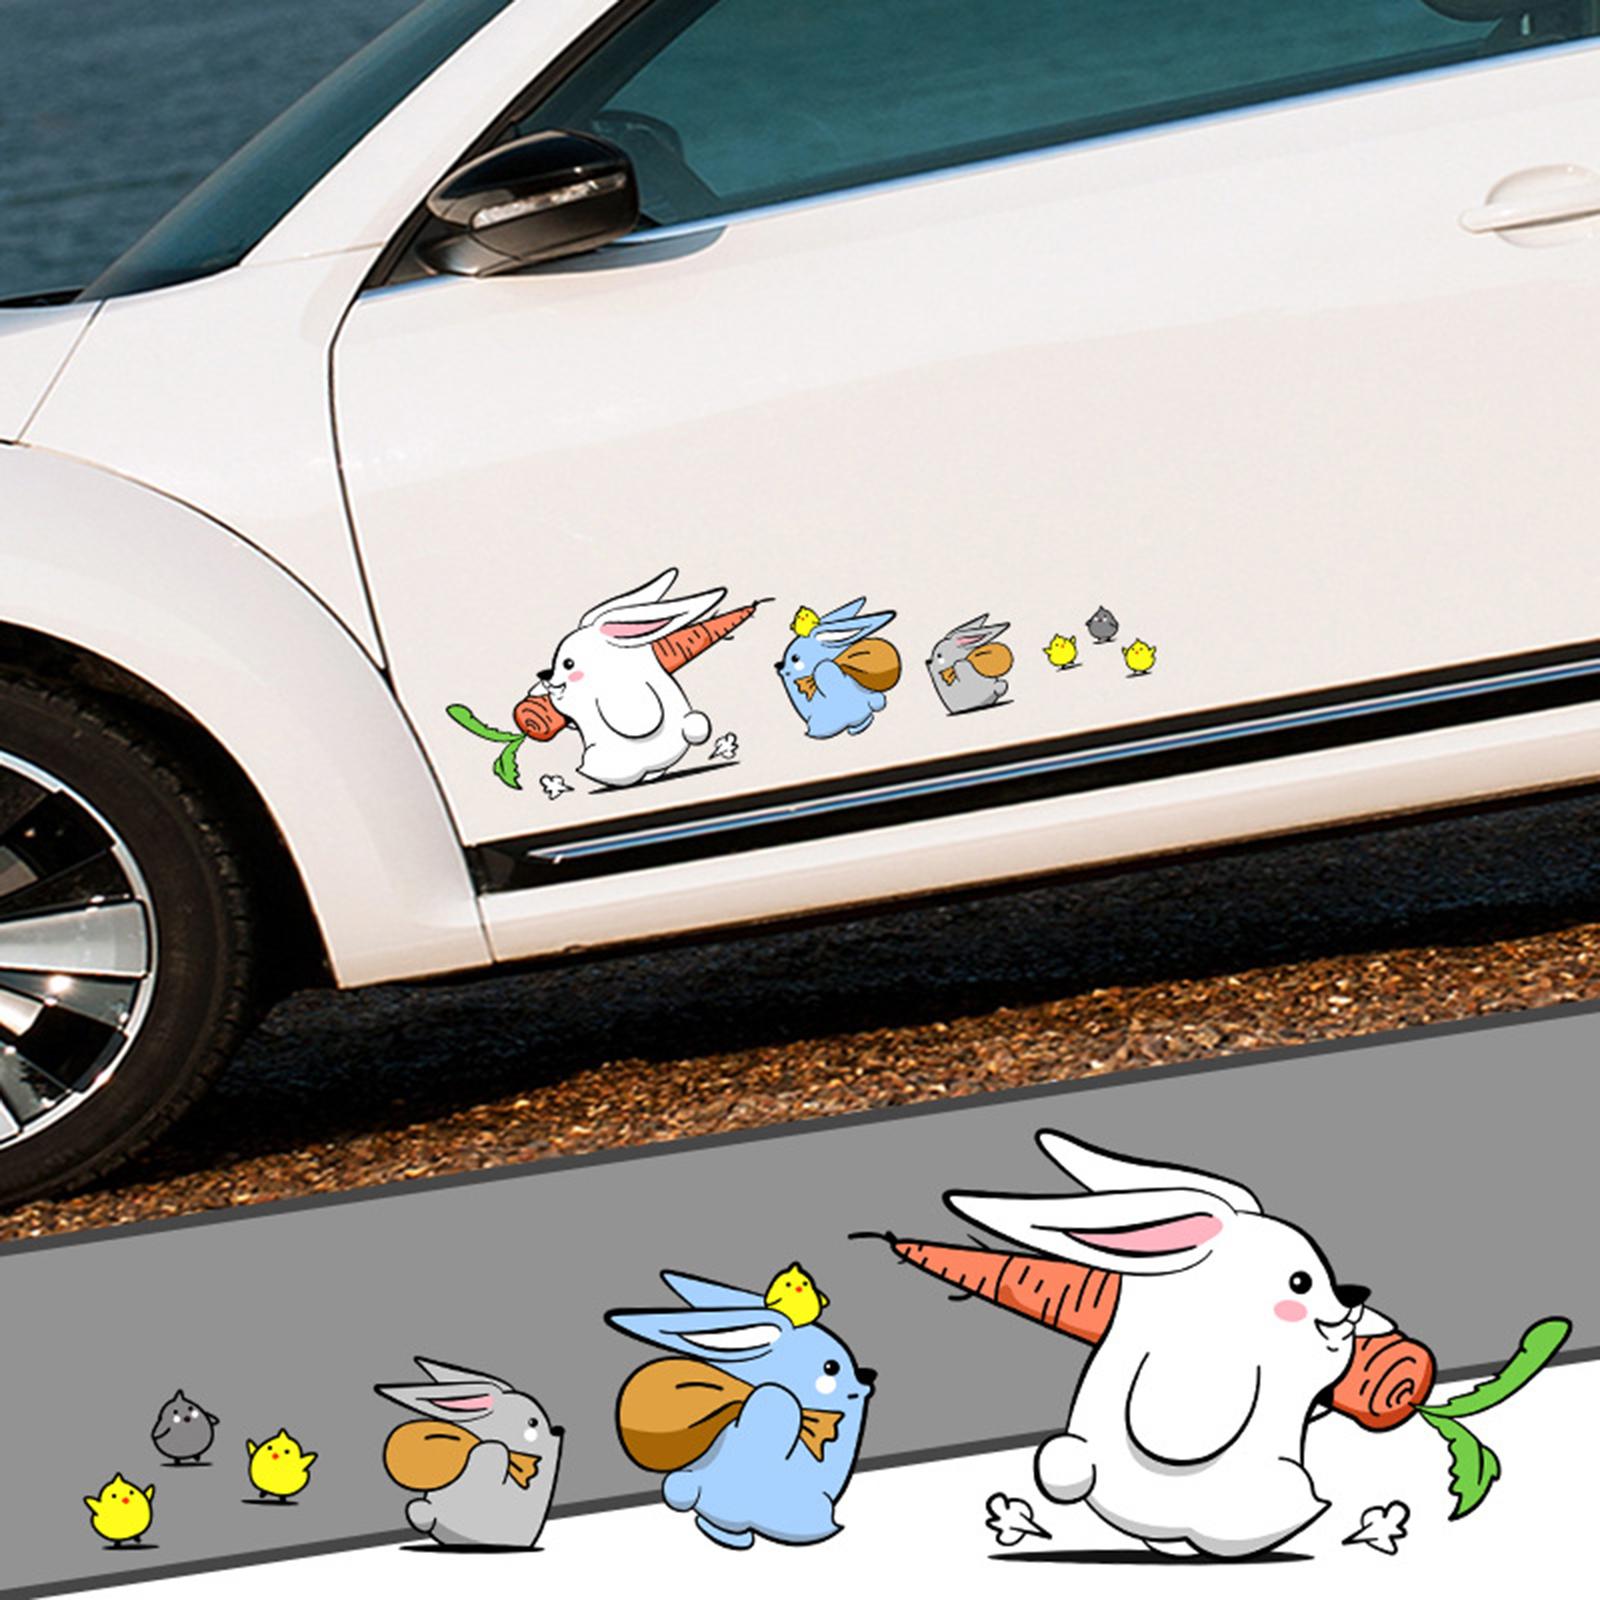 Bunny Car Stickers Car Window Decals Graphic for Cars Windows Vehicles 1 Pair L